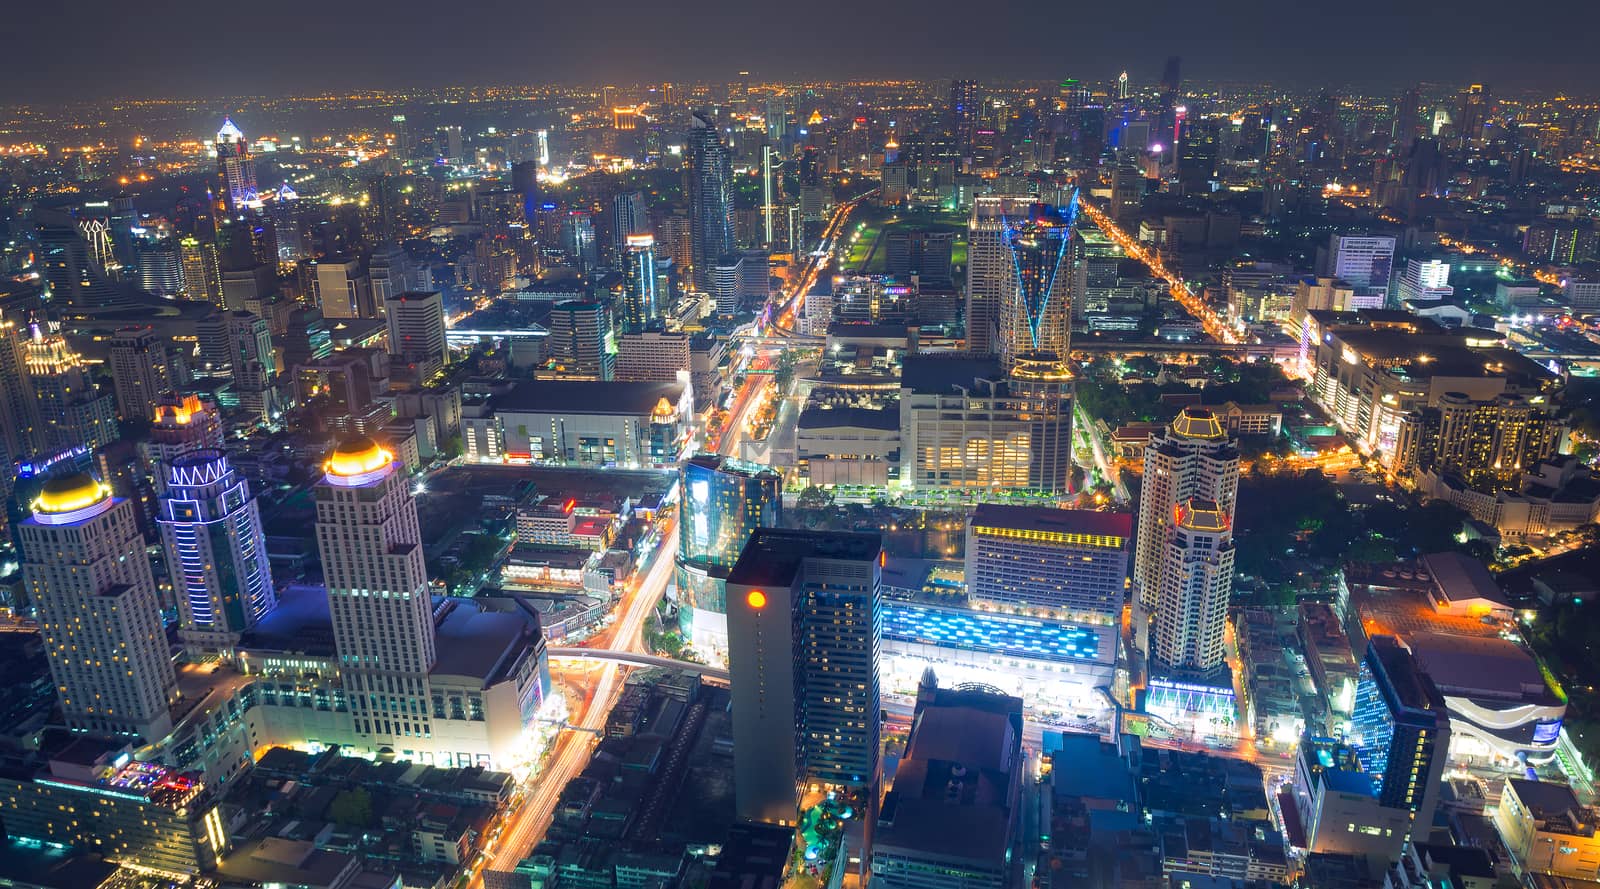 Bangkok at night or Twilight, Aerial Scenic Panoramic view by thampapon